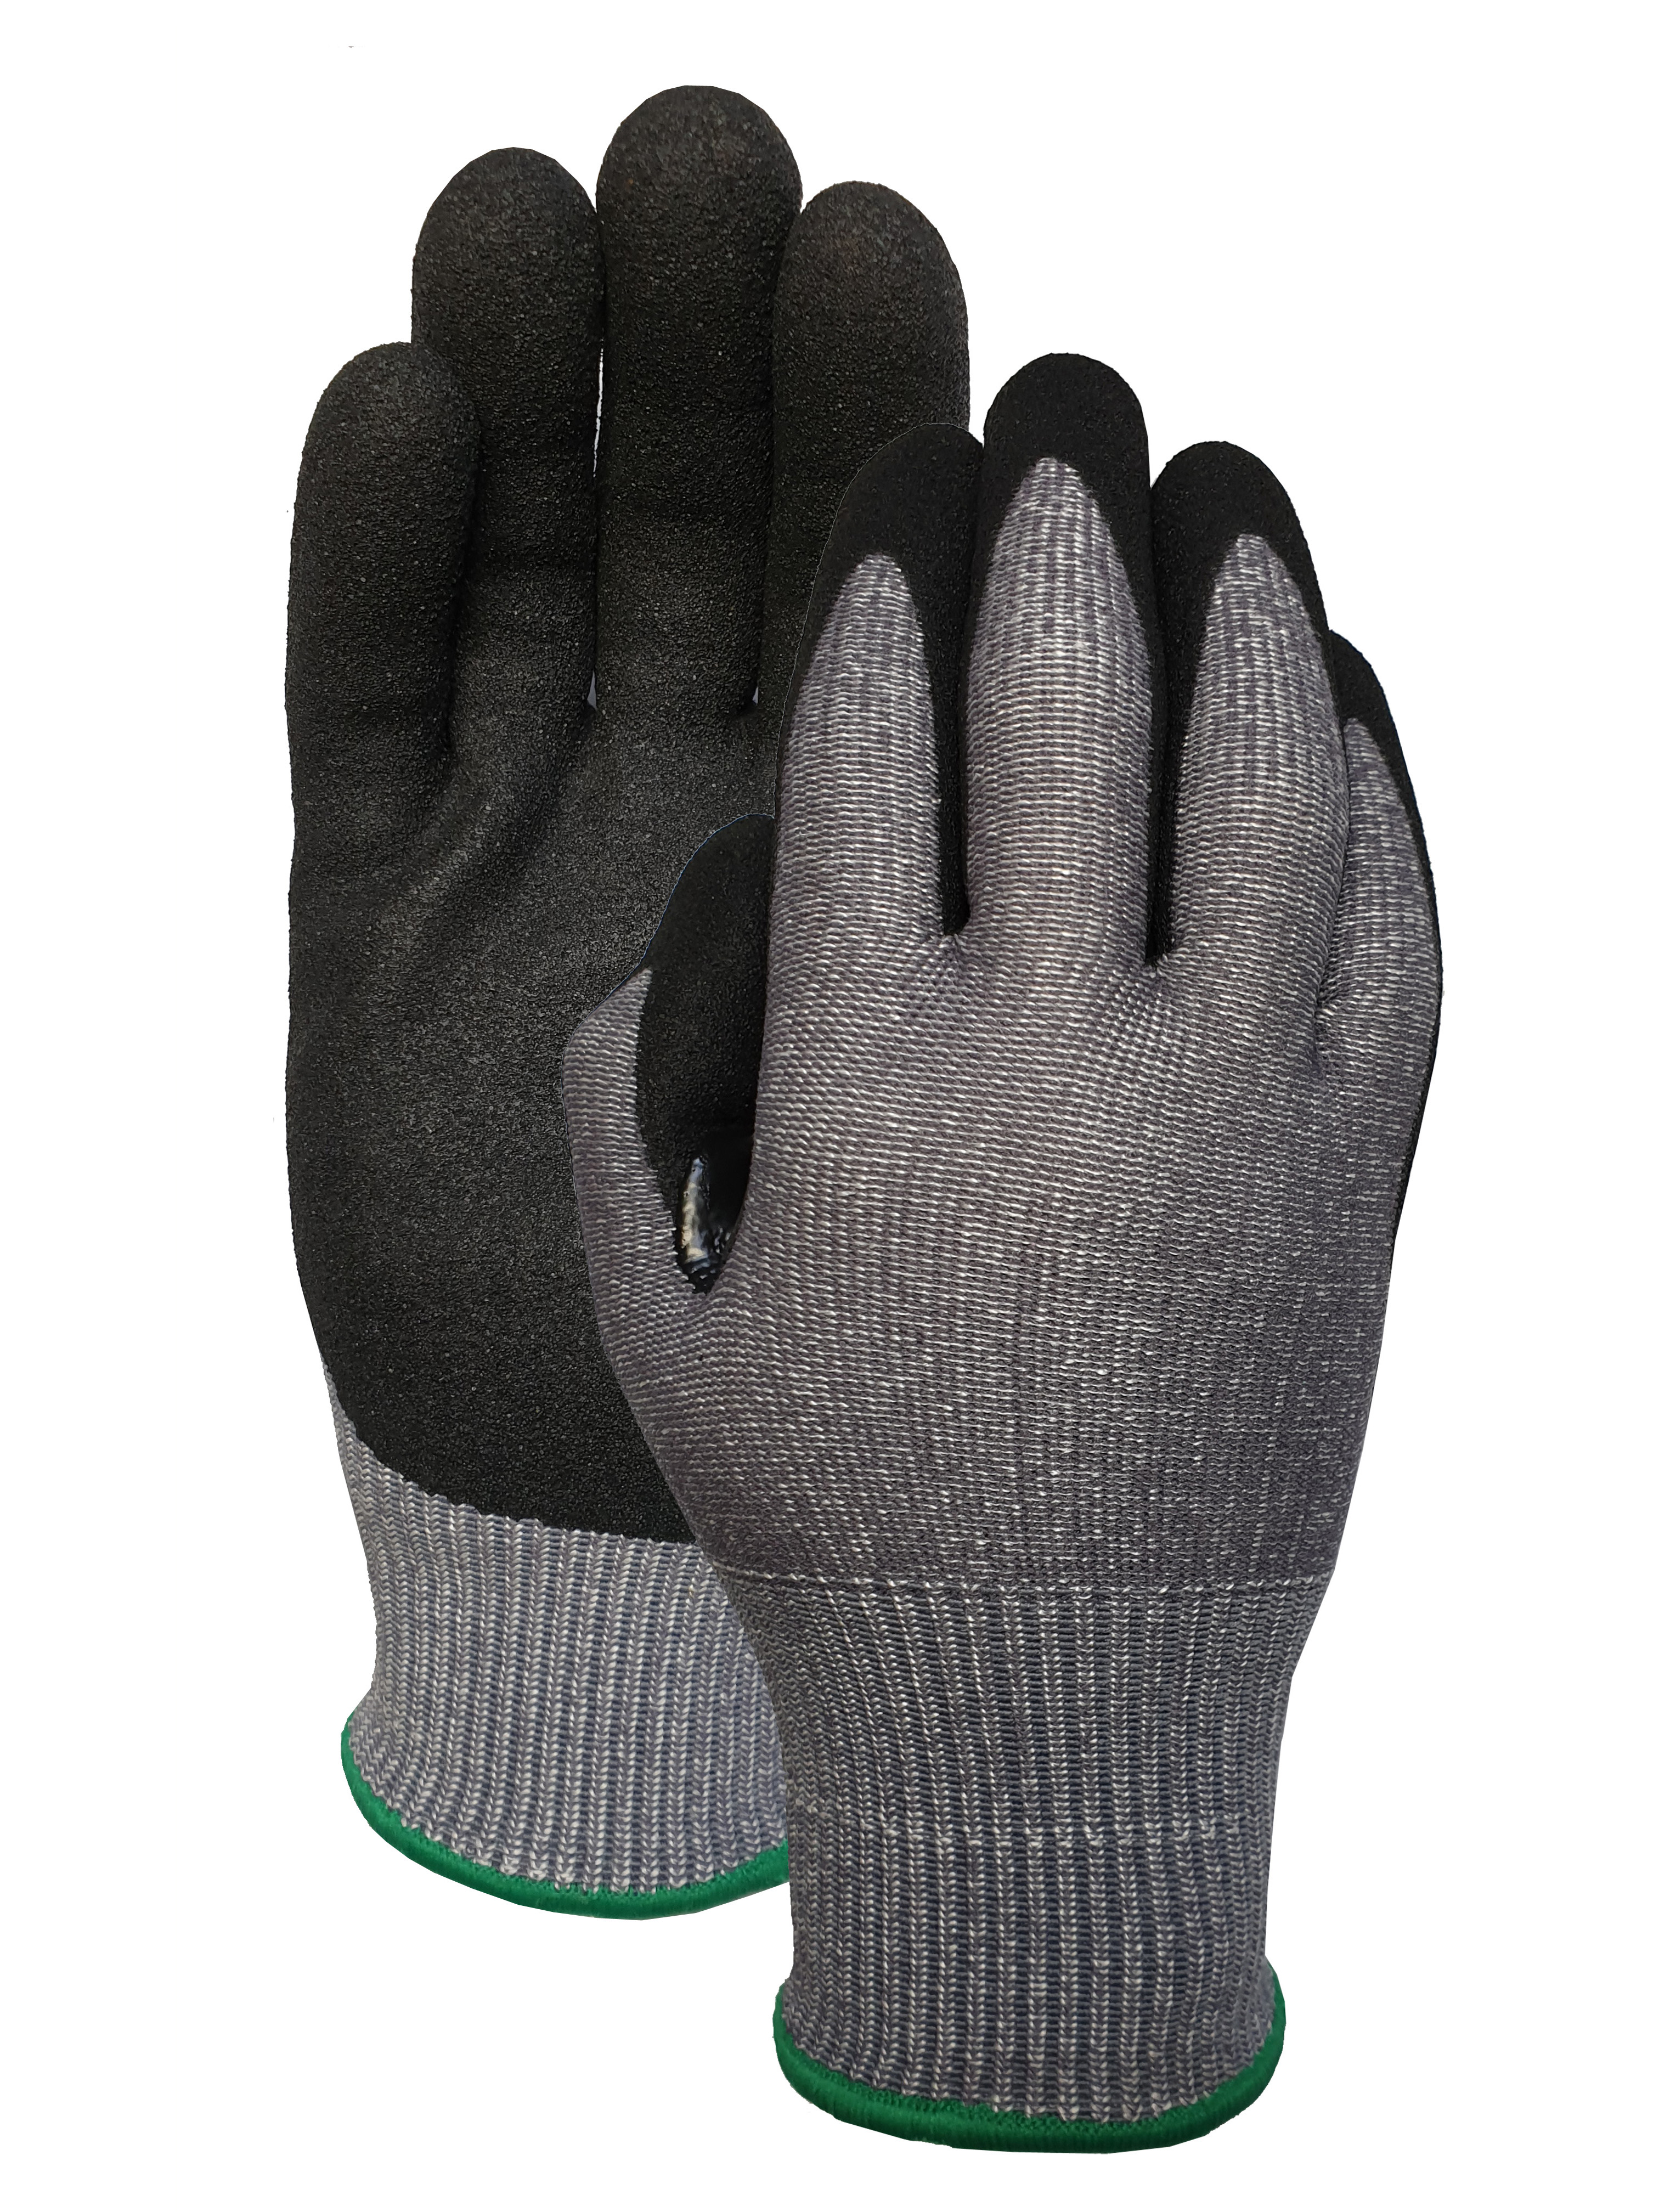 CUT 3 Double knitting with Nitrile sandy finish reinforced patch glove